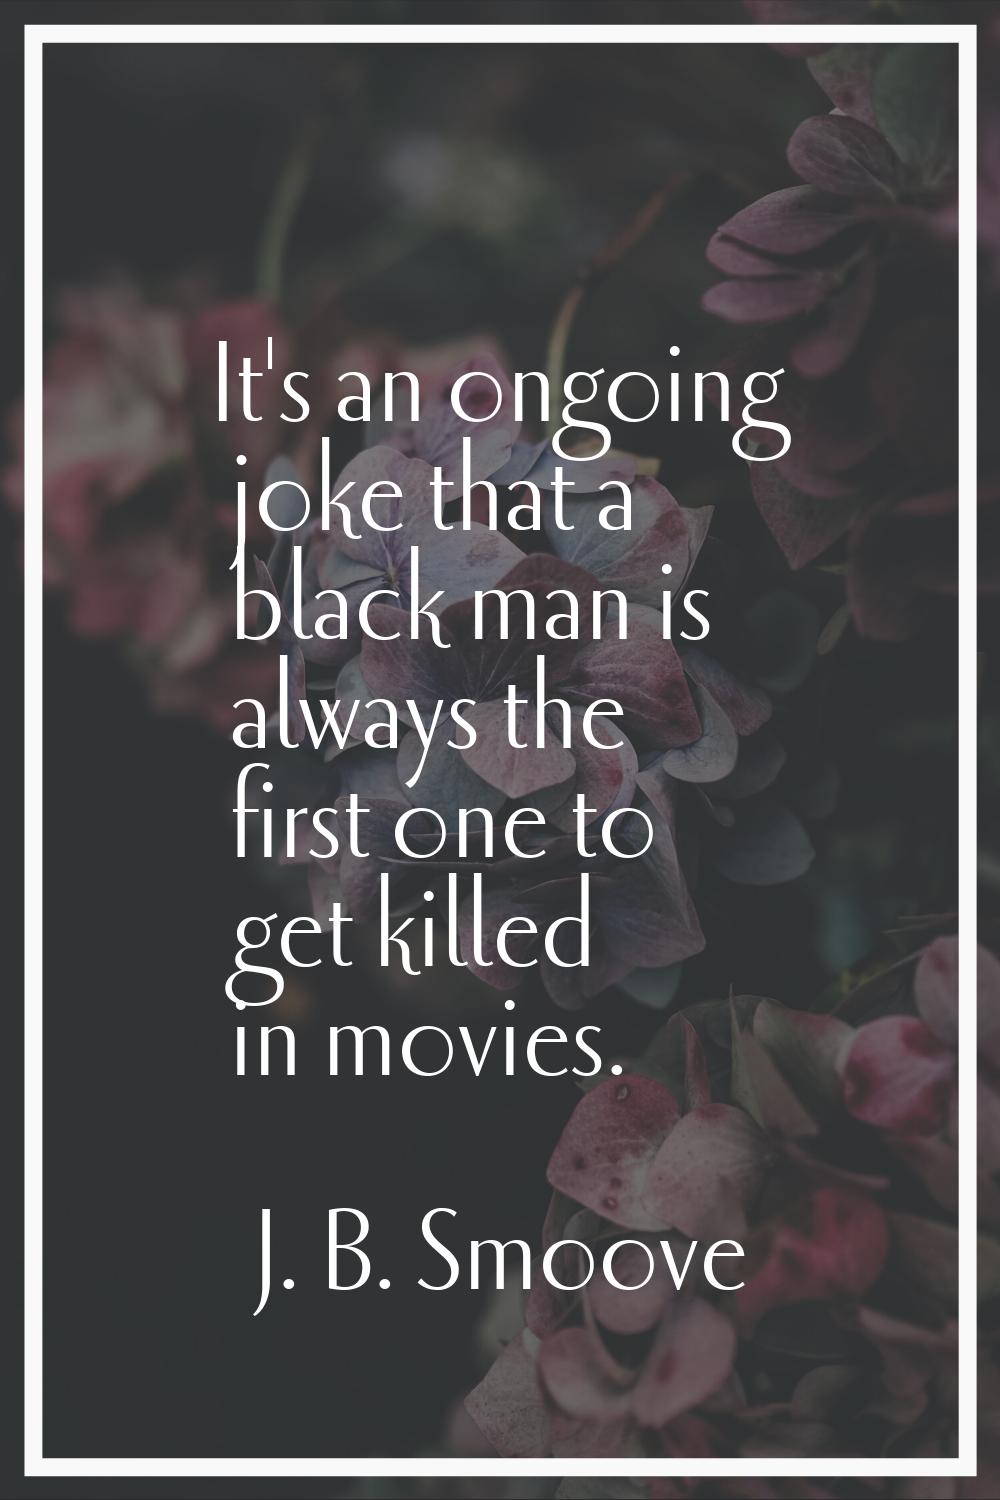 It's an ongoing joke that a black man is always the first one to get killed in movies.